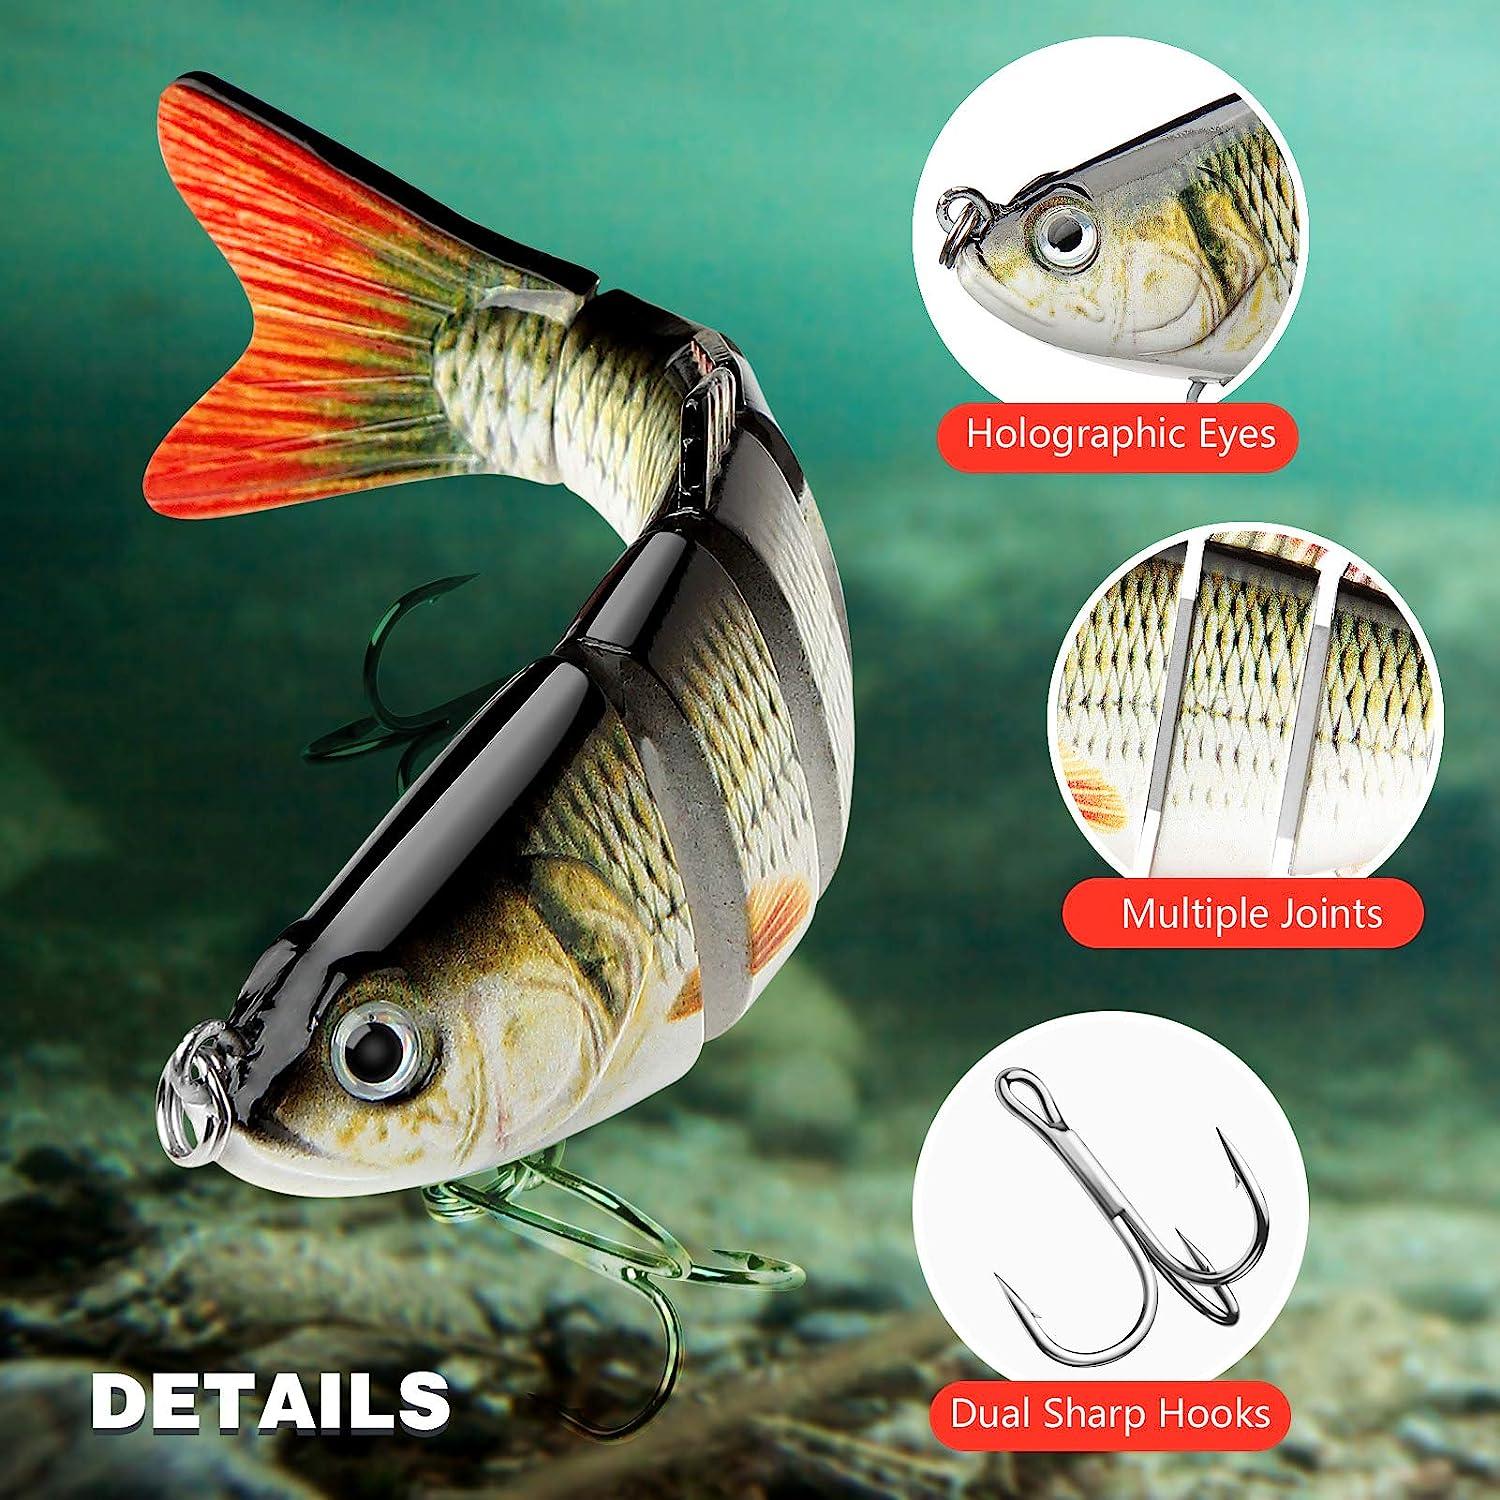 CharmYee Bass Fishing Lure Topwater Bass Lures Fishing Lures Multi